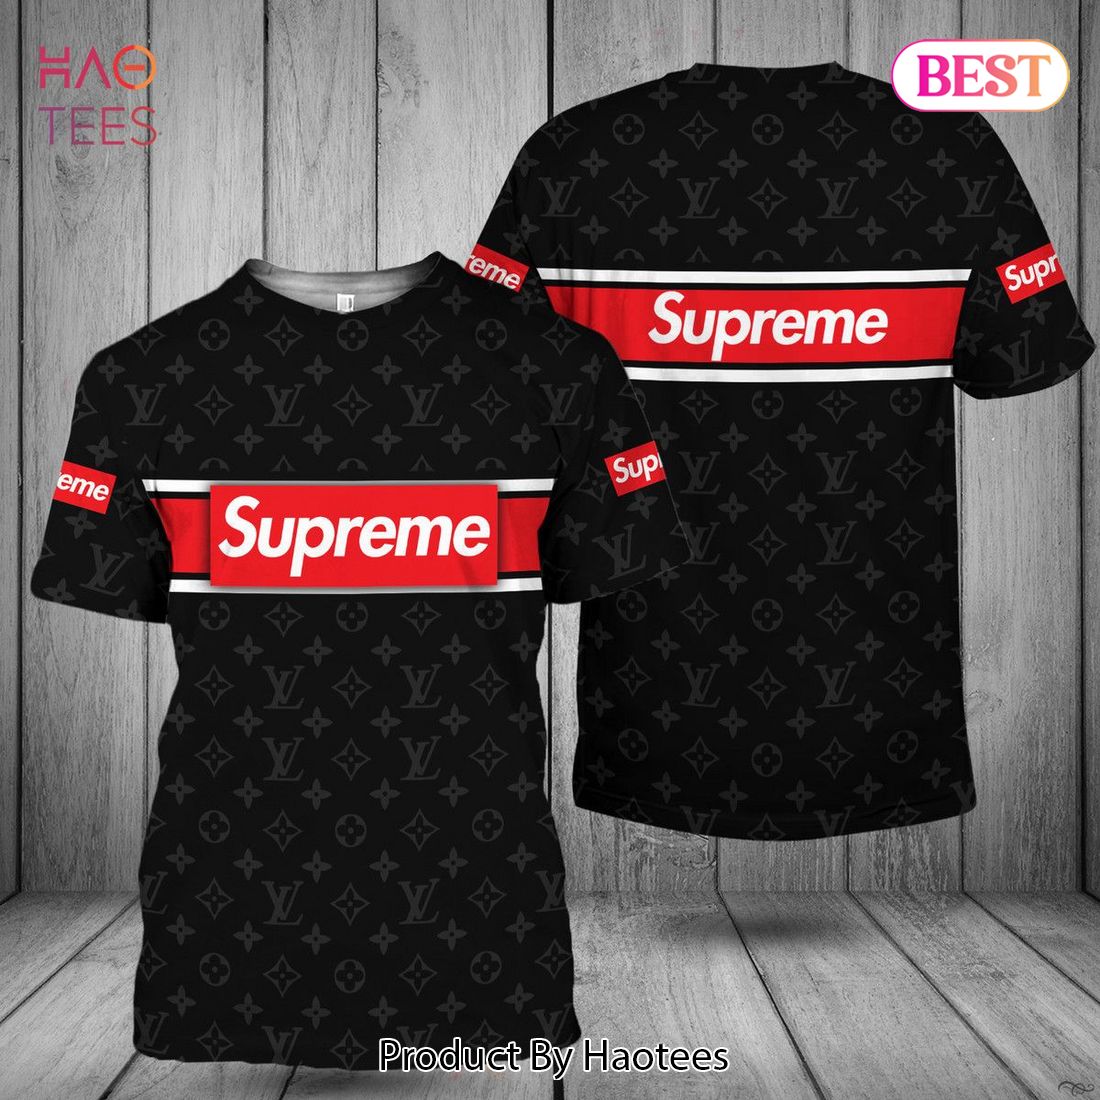 NEW Supreme Full Printing Logo Loius Vuitton Luxury Brand 3D T-Shirt Limited Edition